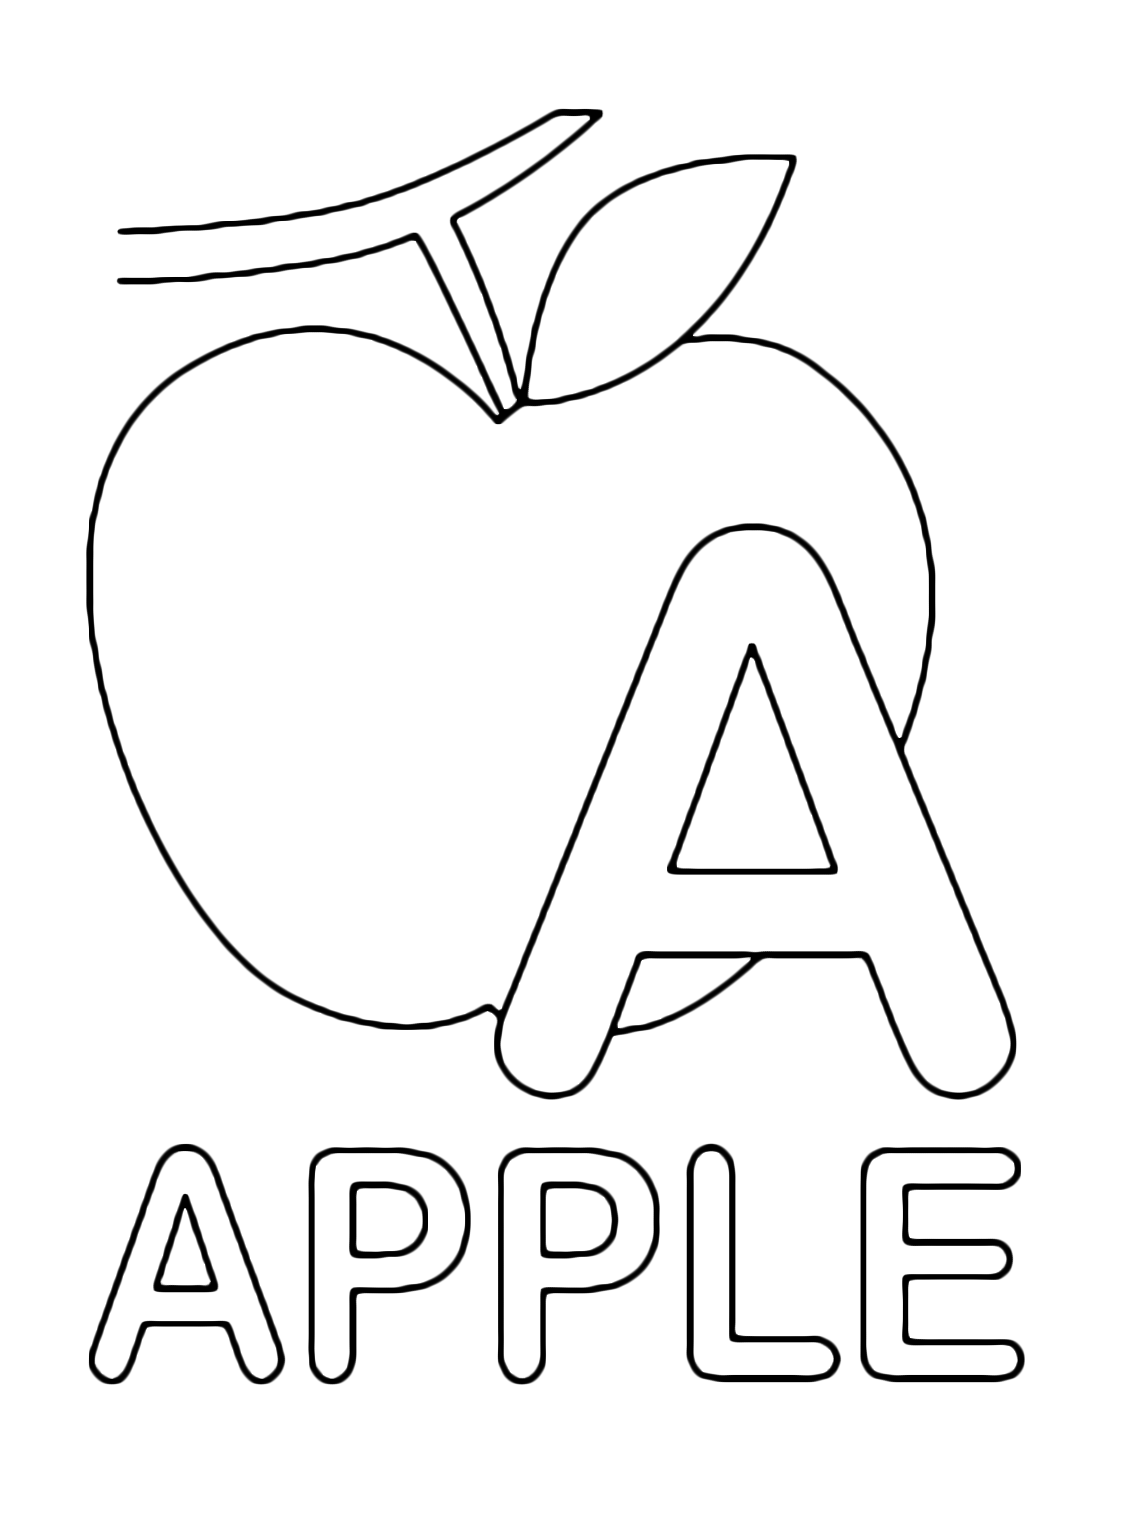 Letters and numbers - A for apple uppercase letter